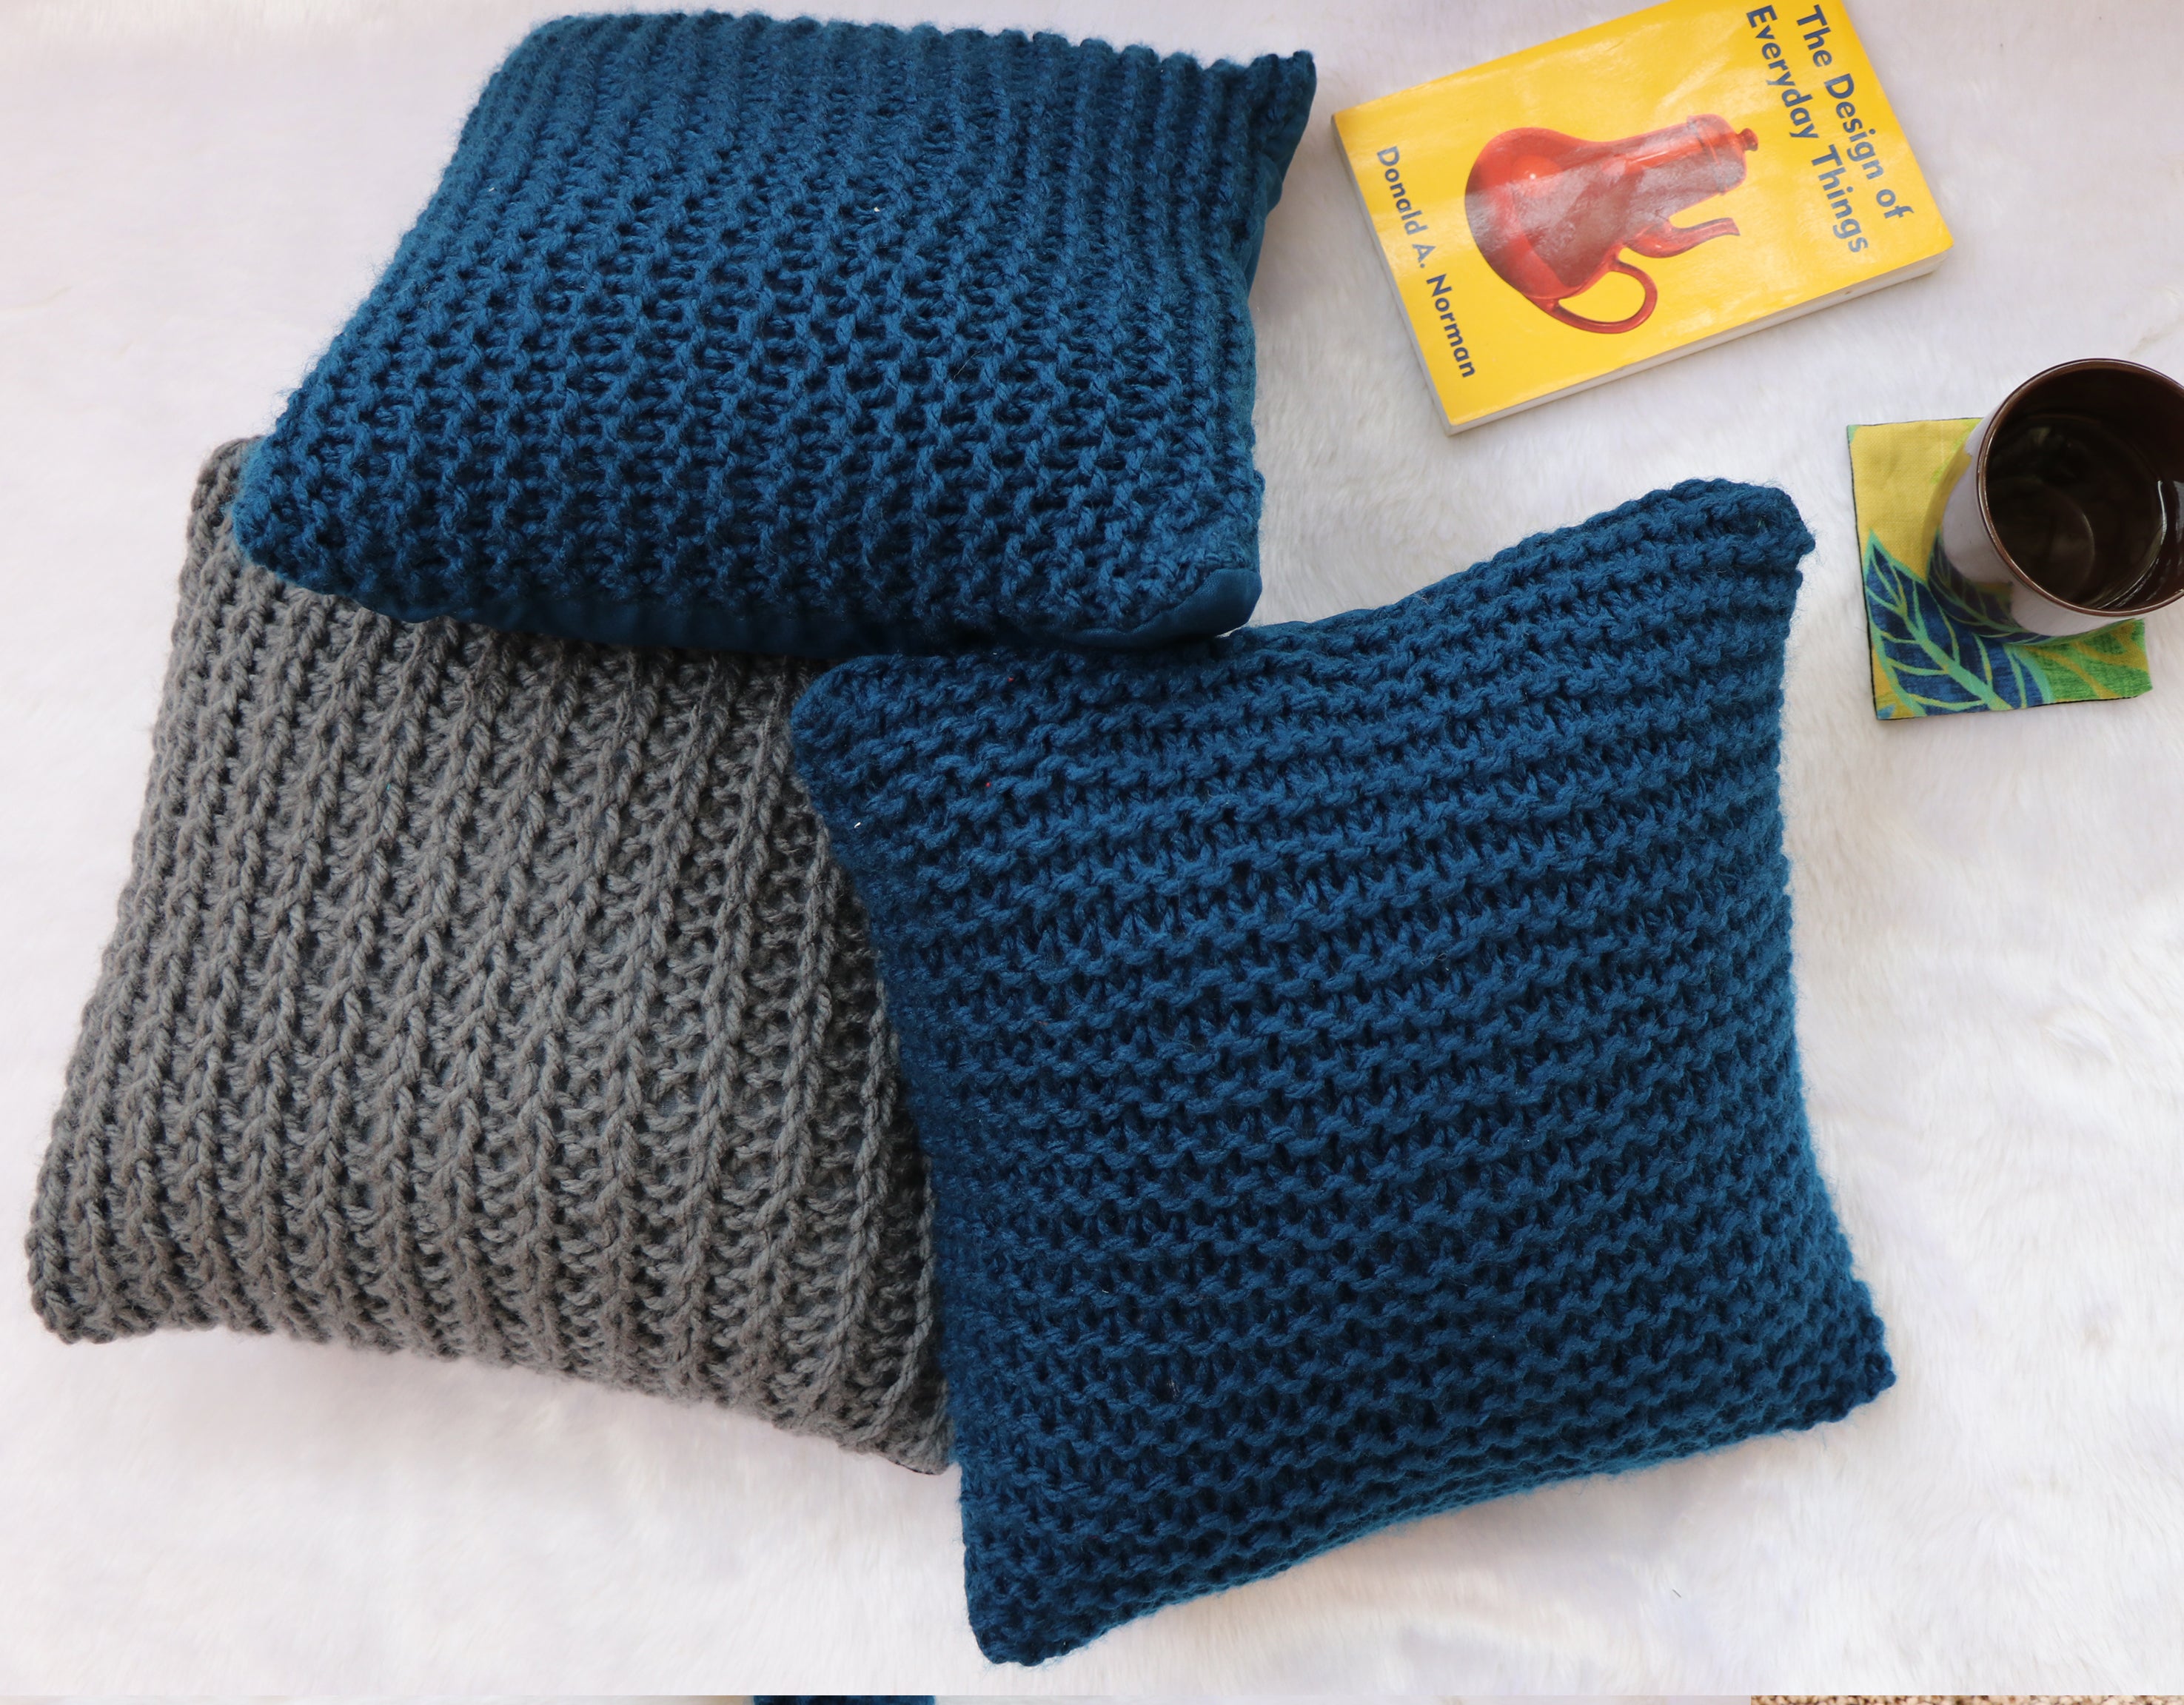 Navy Blue hand knitted cushions by artisans of India for winter season